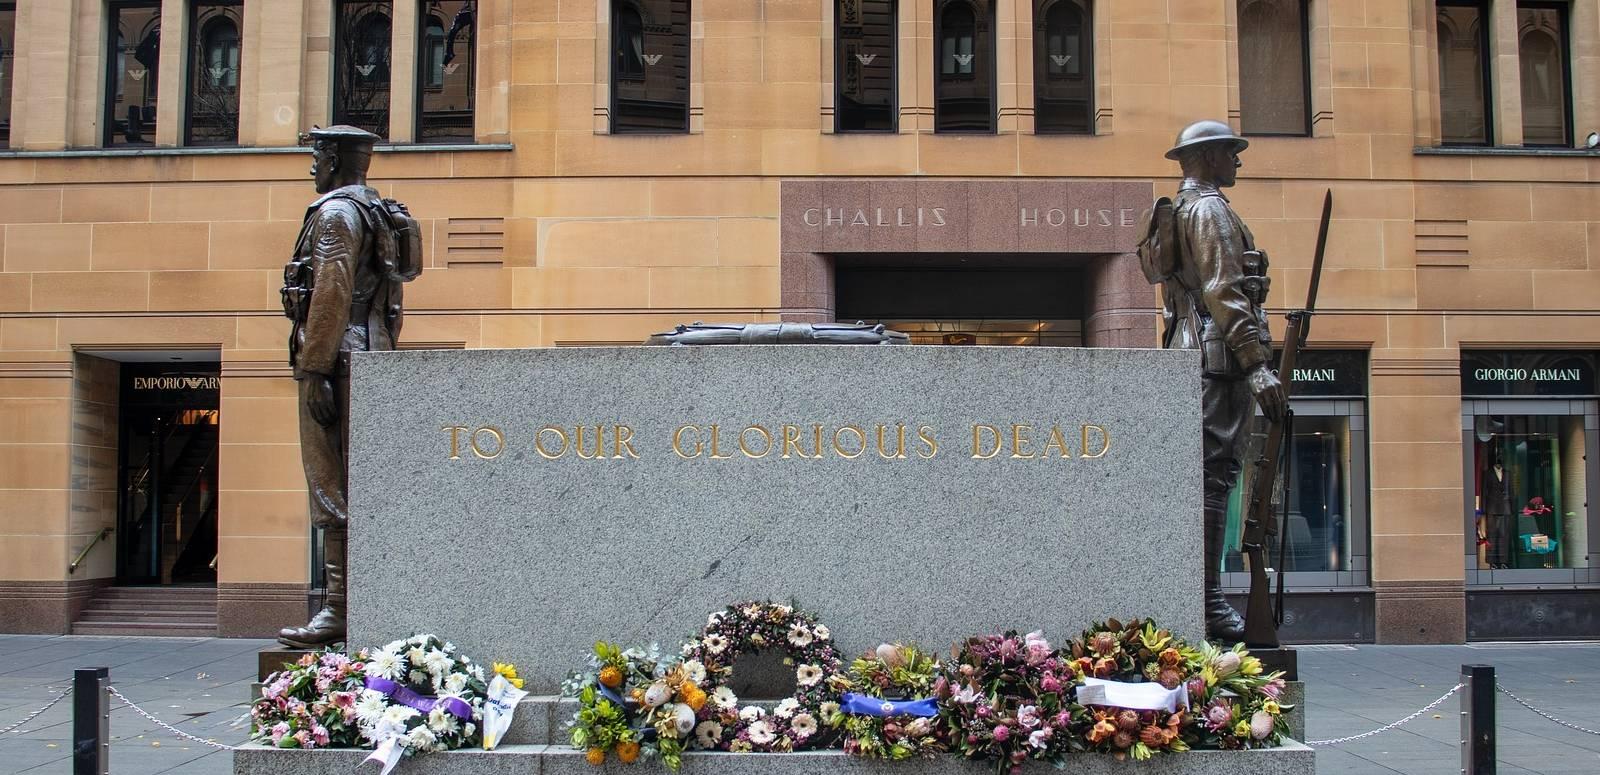 An Anzac Day memorial in Sydney inscribed 'To Our Glorious Dead' and flanked by statues of two soldiers. Wreaths of flowers surround the memorial